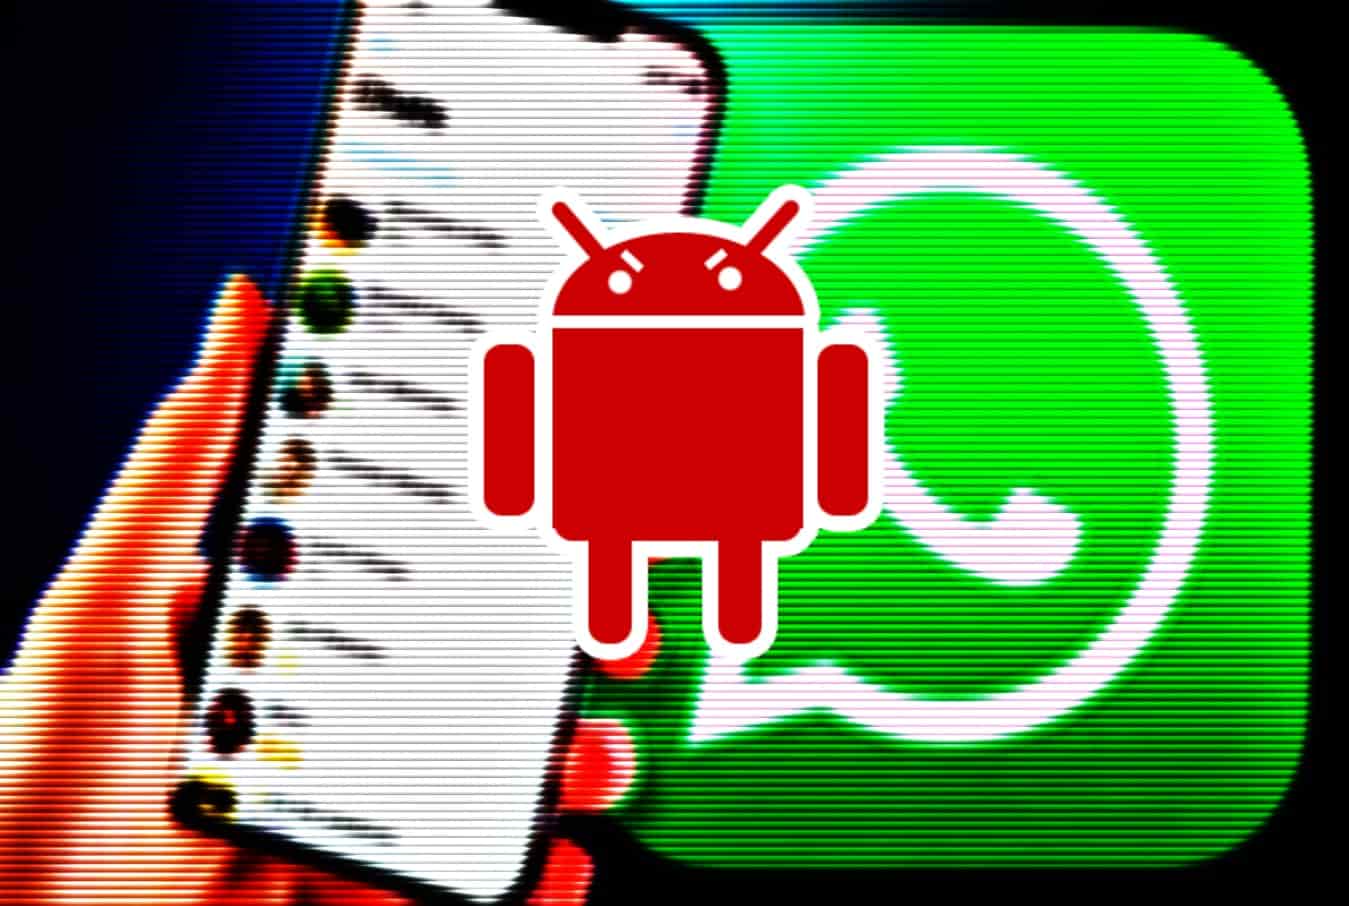 Watch out as new Android malware spreads through WhatsApp